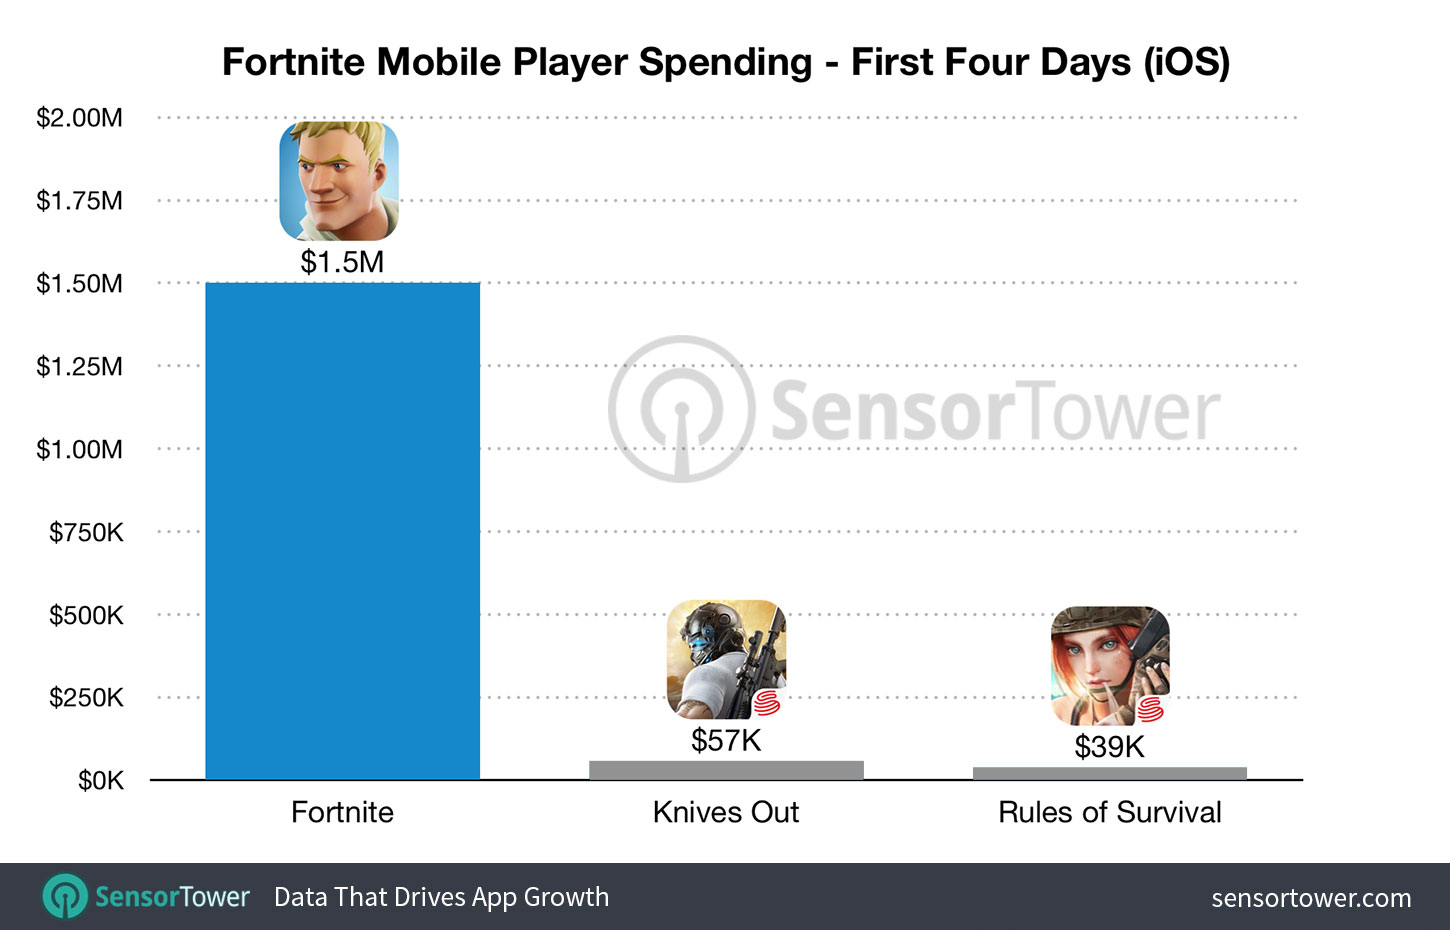 'Fortnite' for iOS Made $1.5 Million in 4 Days